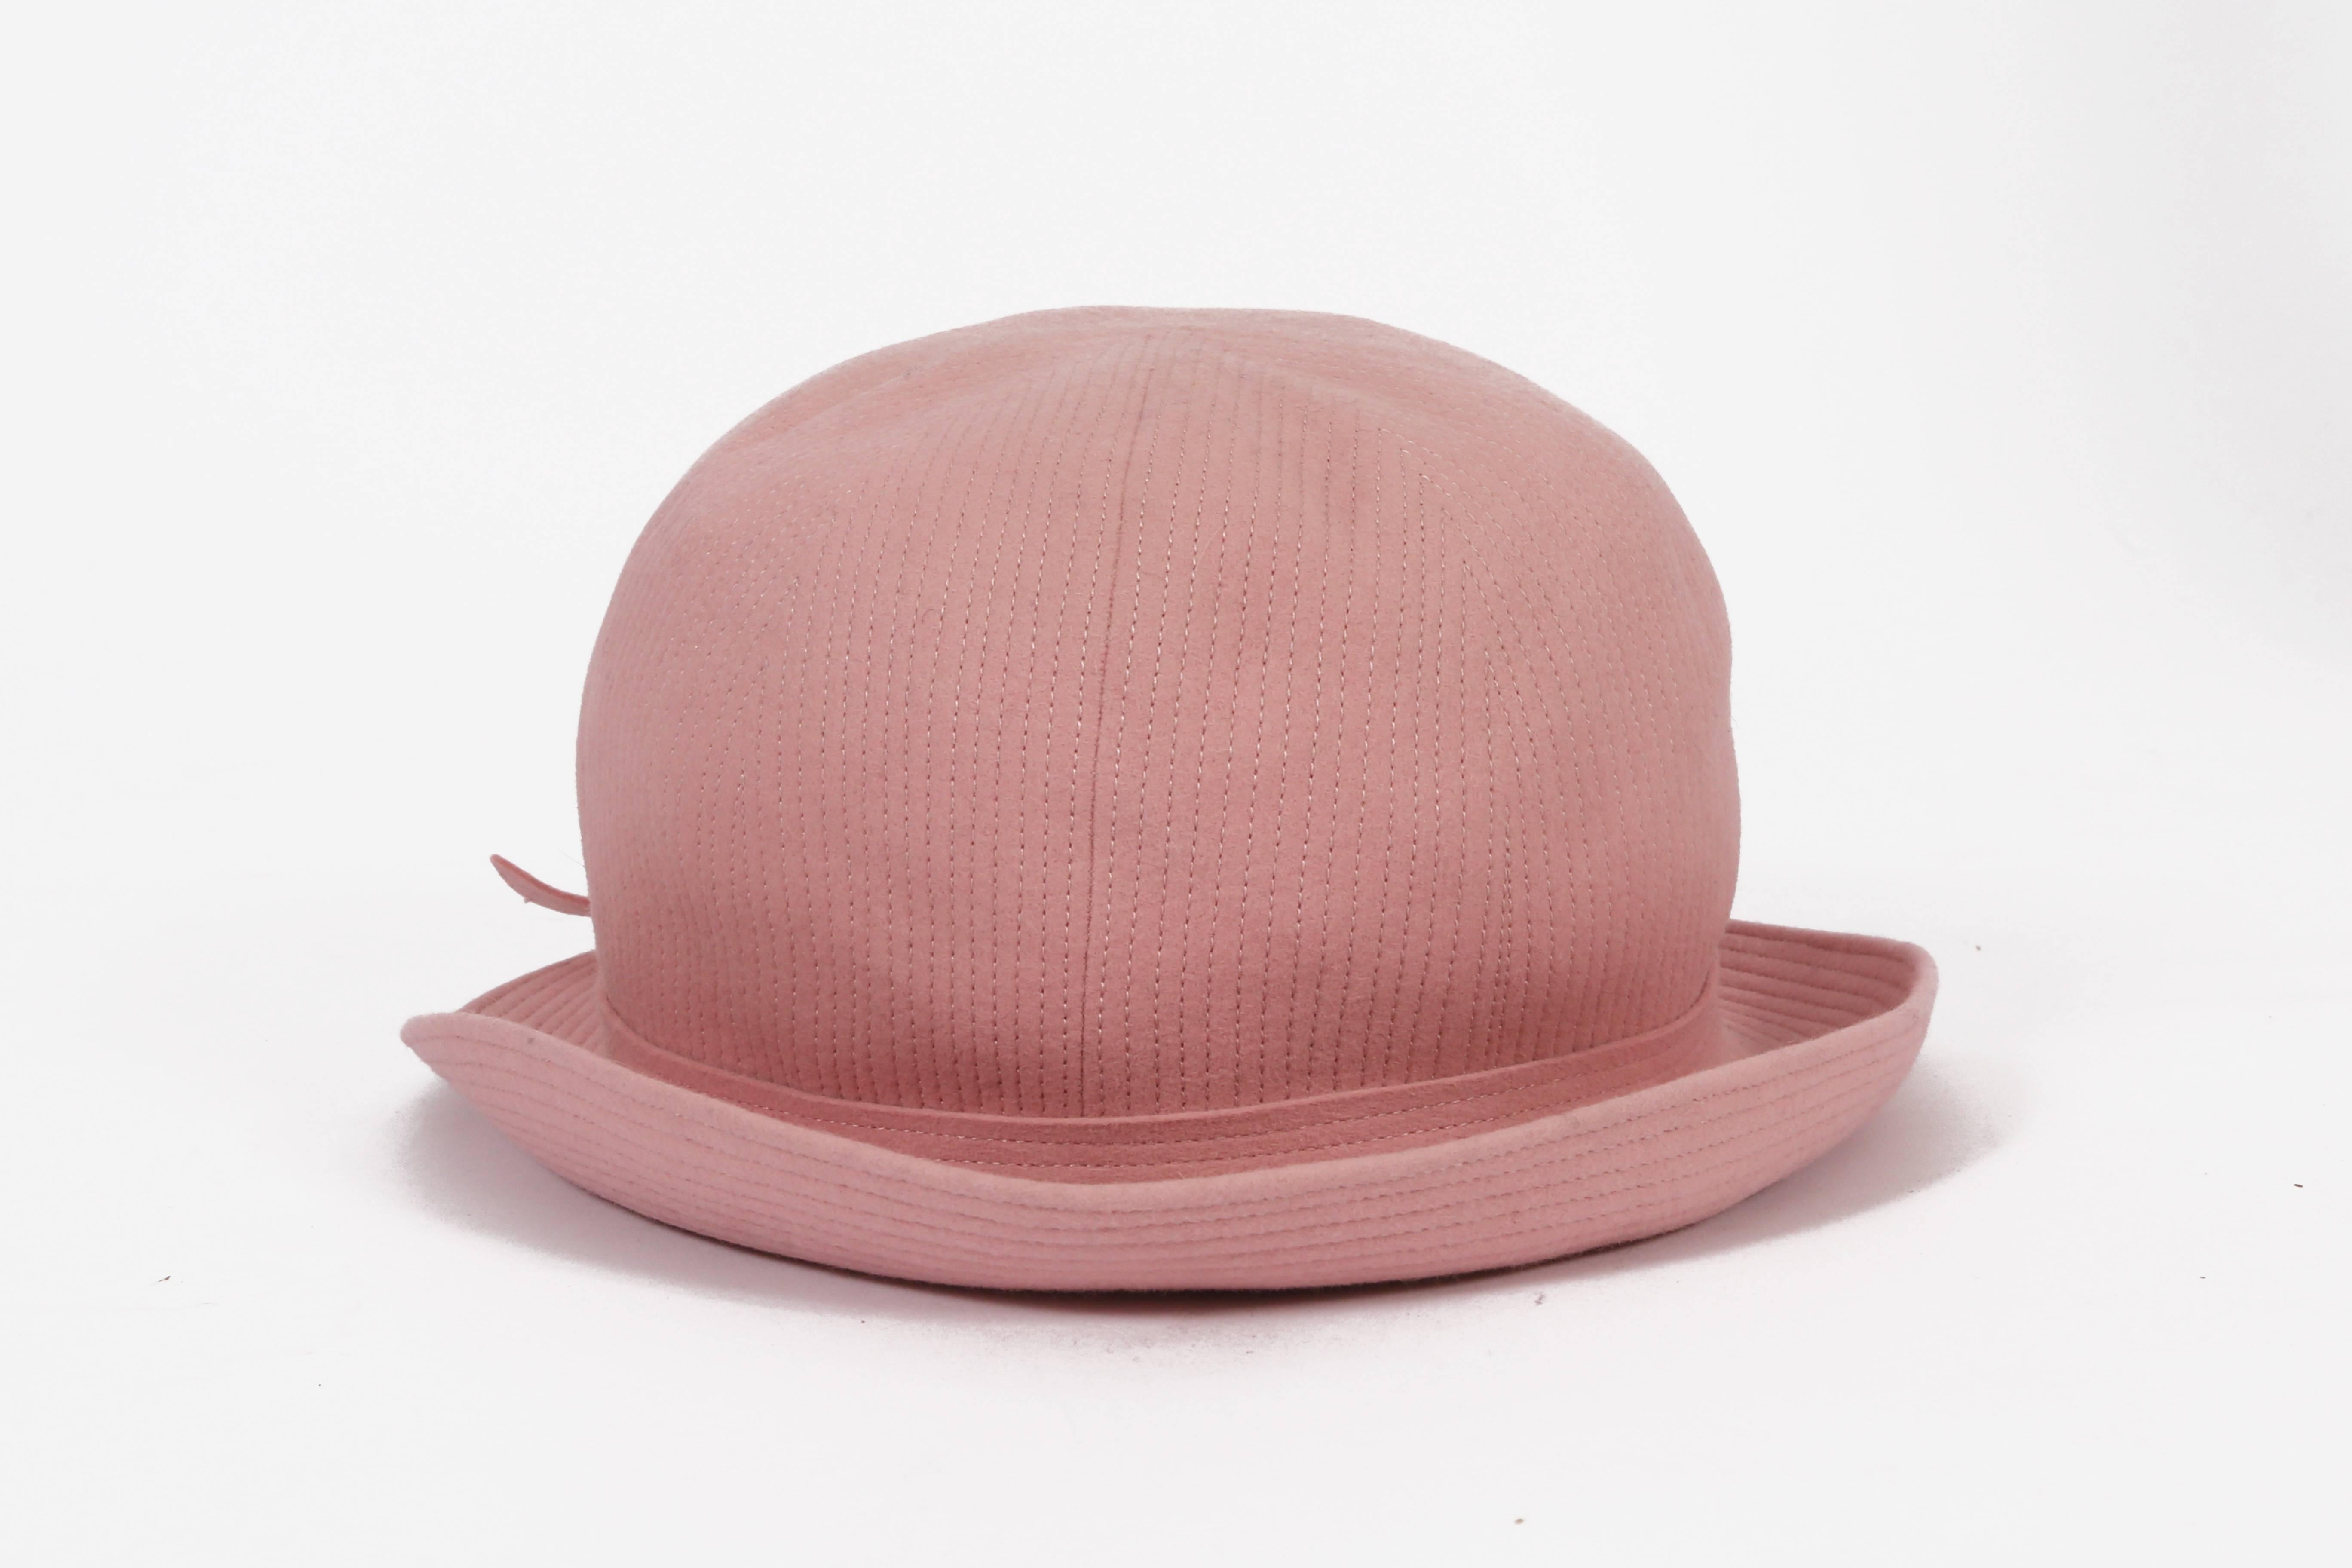 Balenciaga Haute Couture baby pink bowler hat, circa 1961. As seen on the cover of Vogue, May 1961.